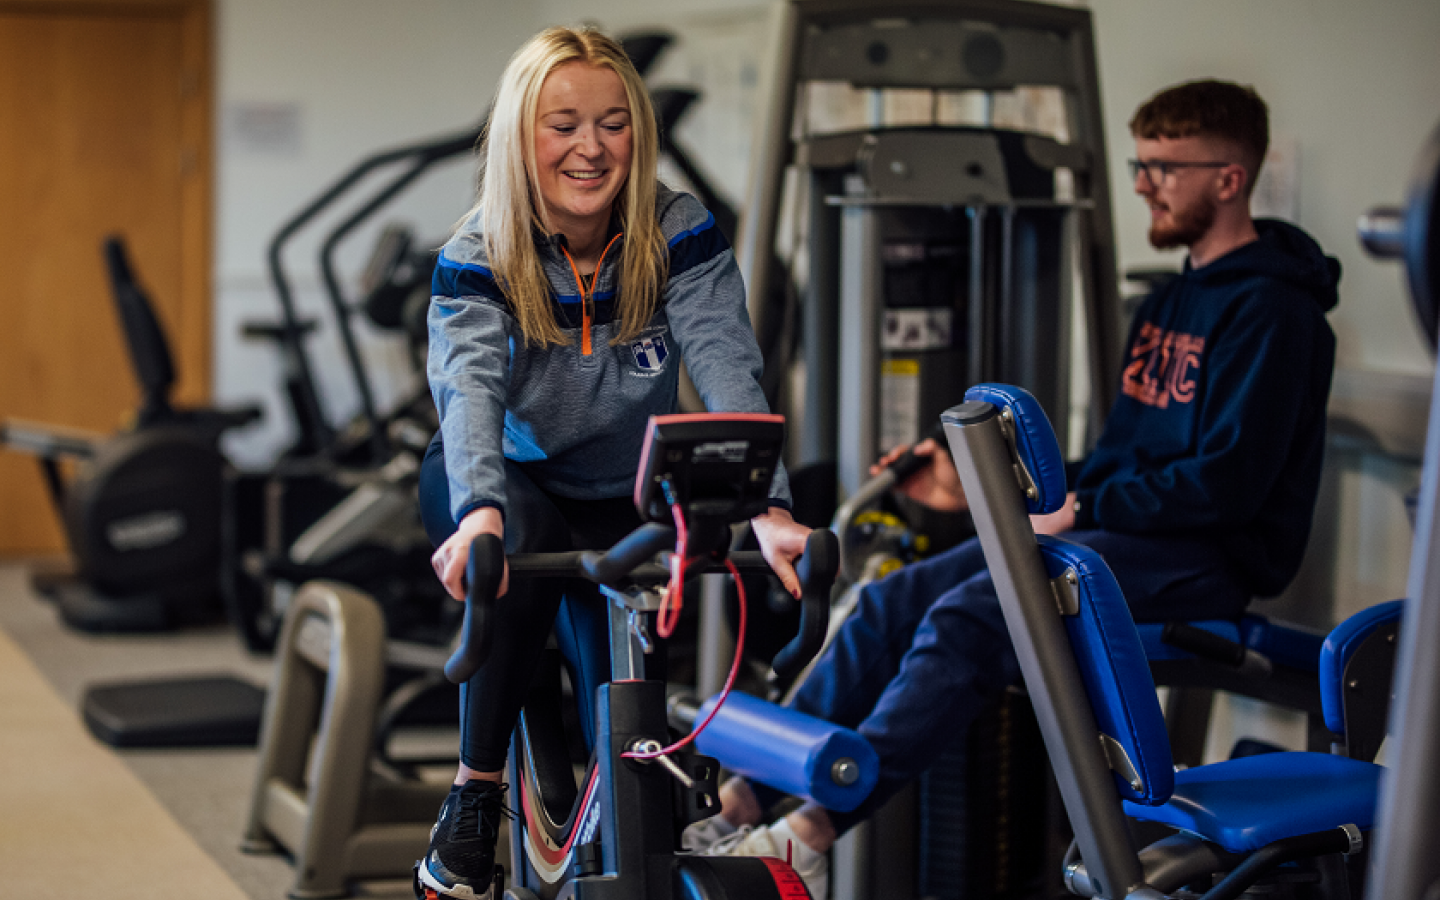 A female and male student are pictured in a gym using cycling equipment